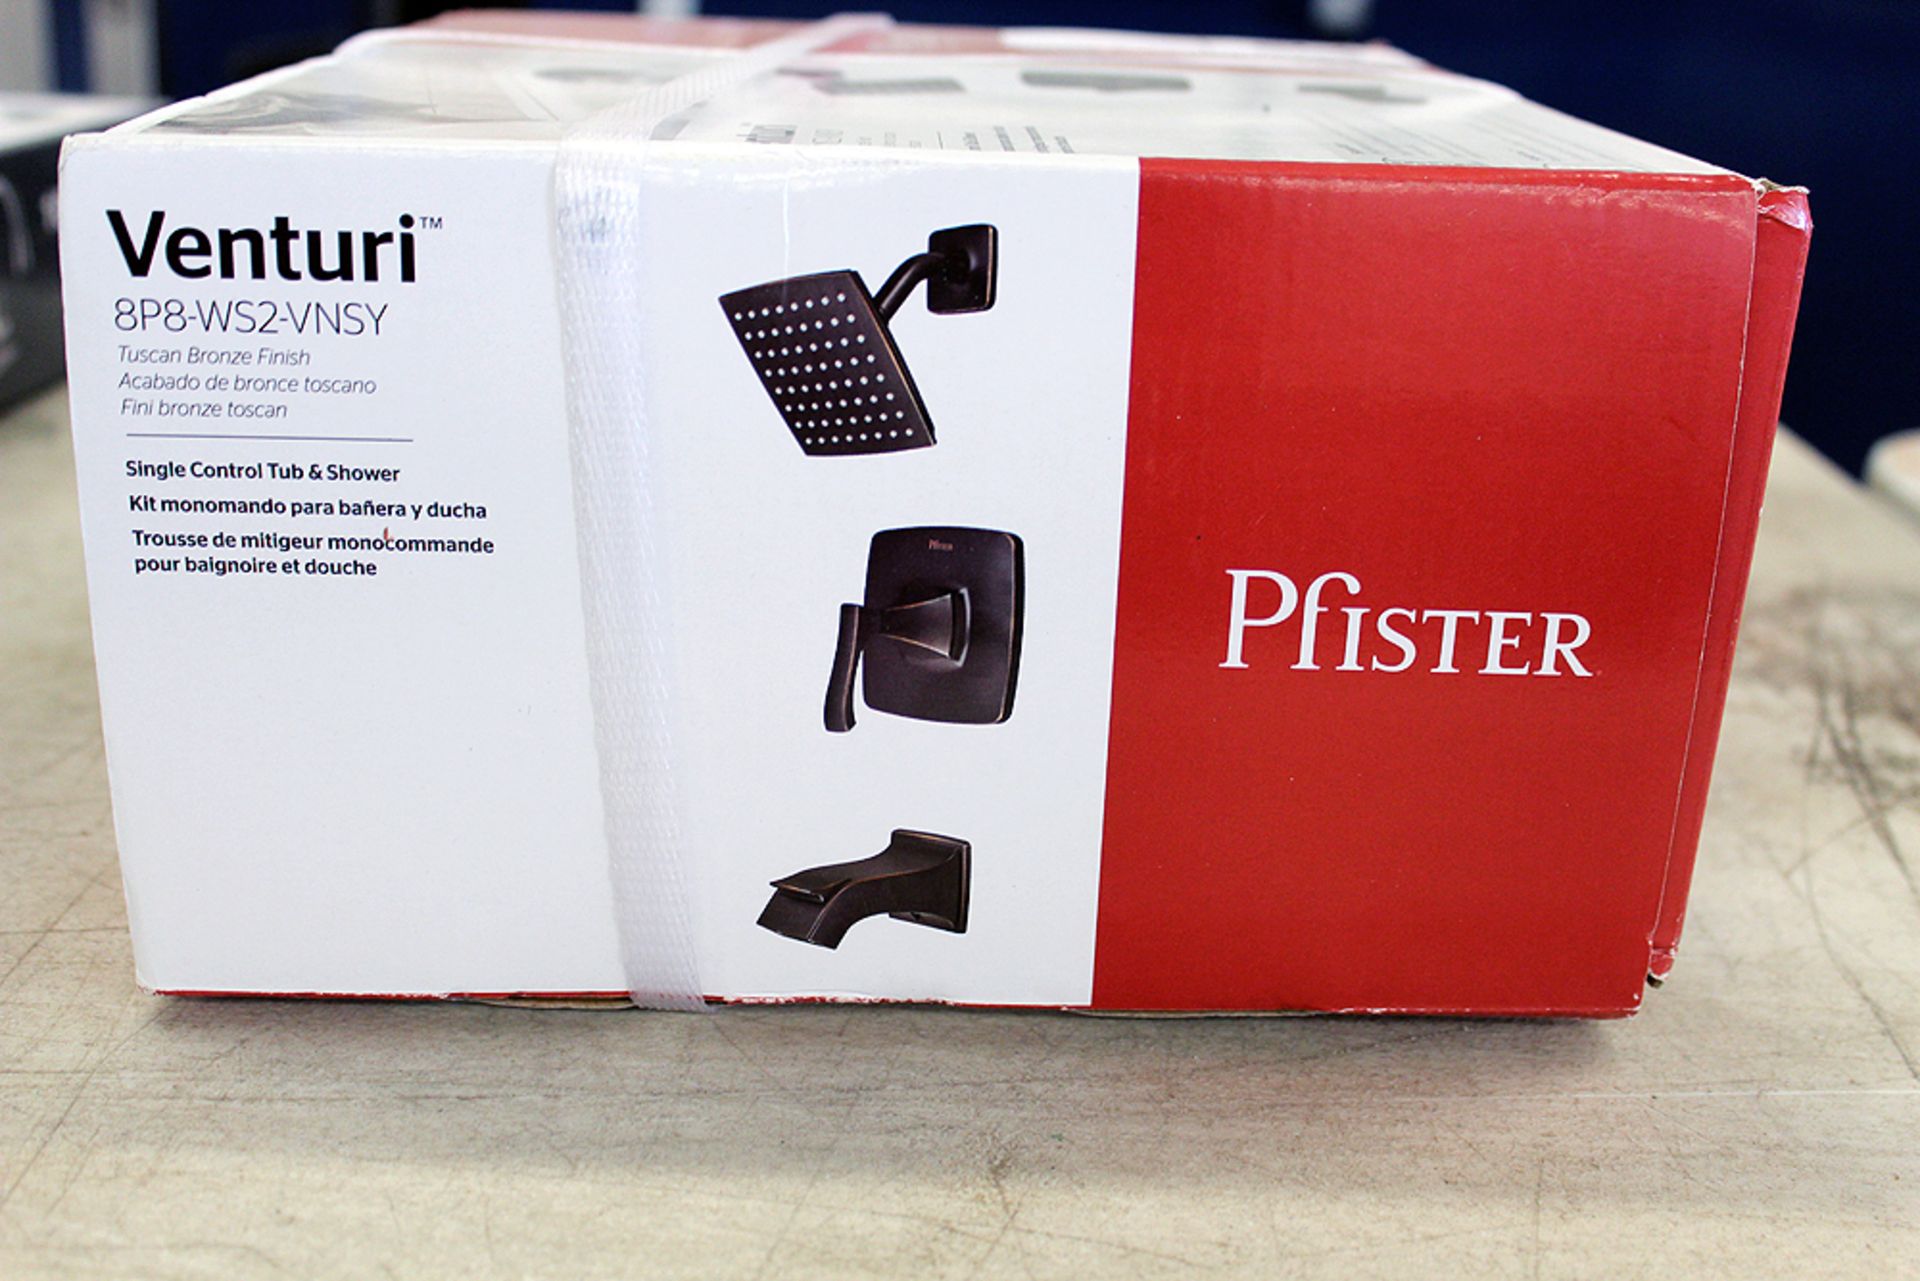 Pfister tub and shower kit - Image 2 of 2